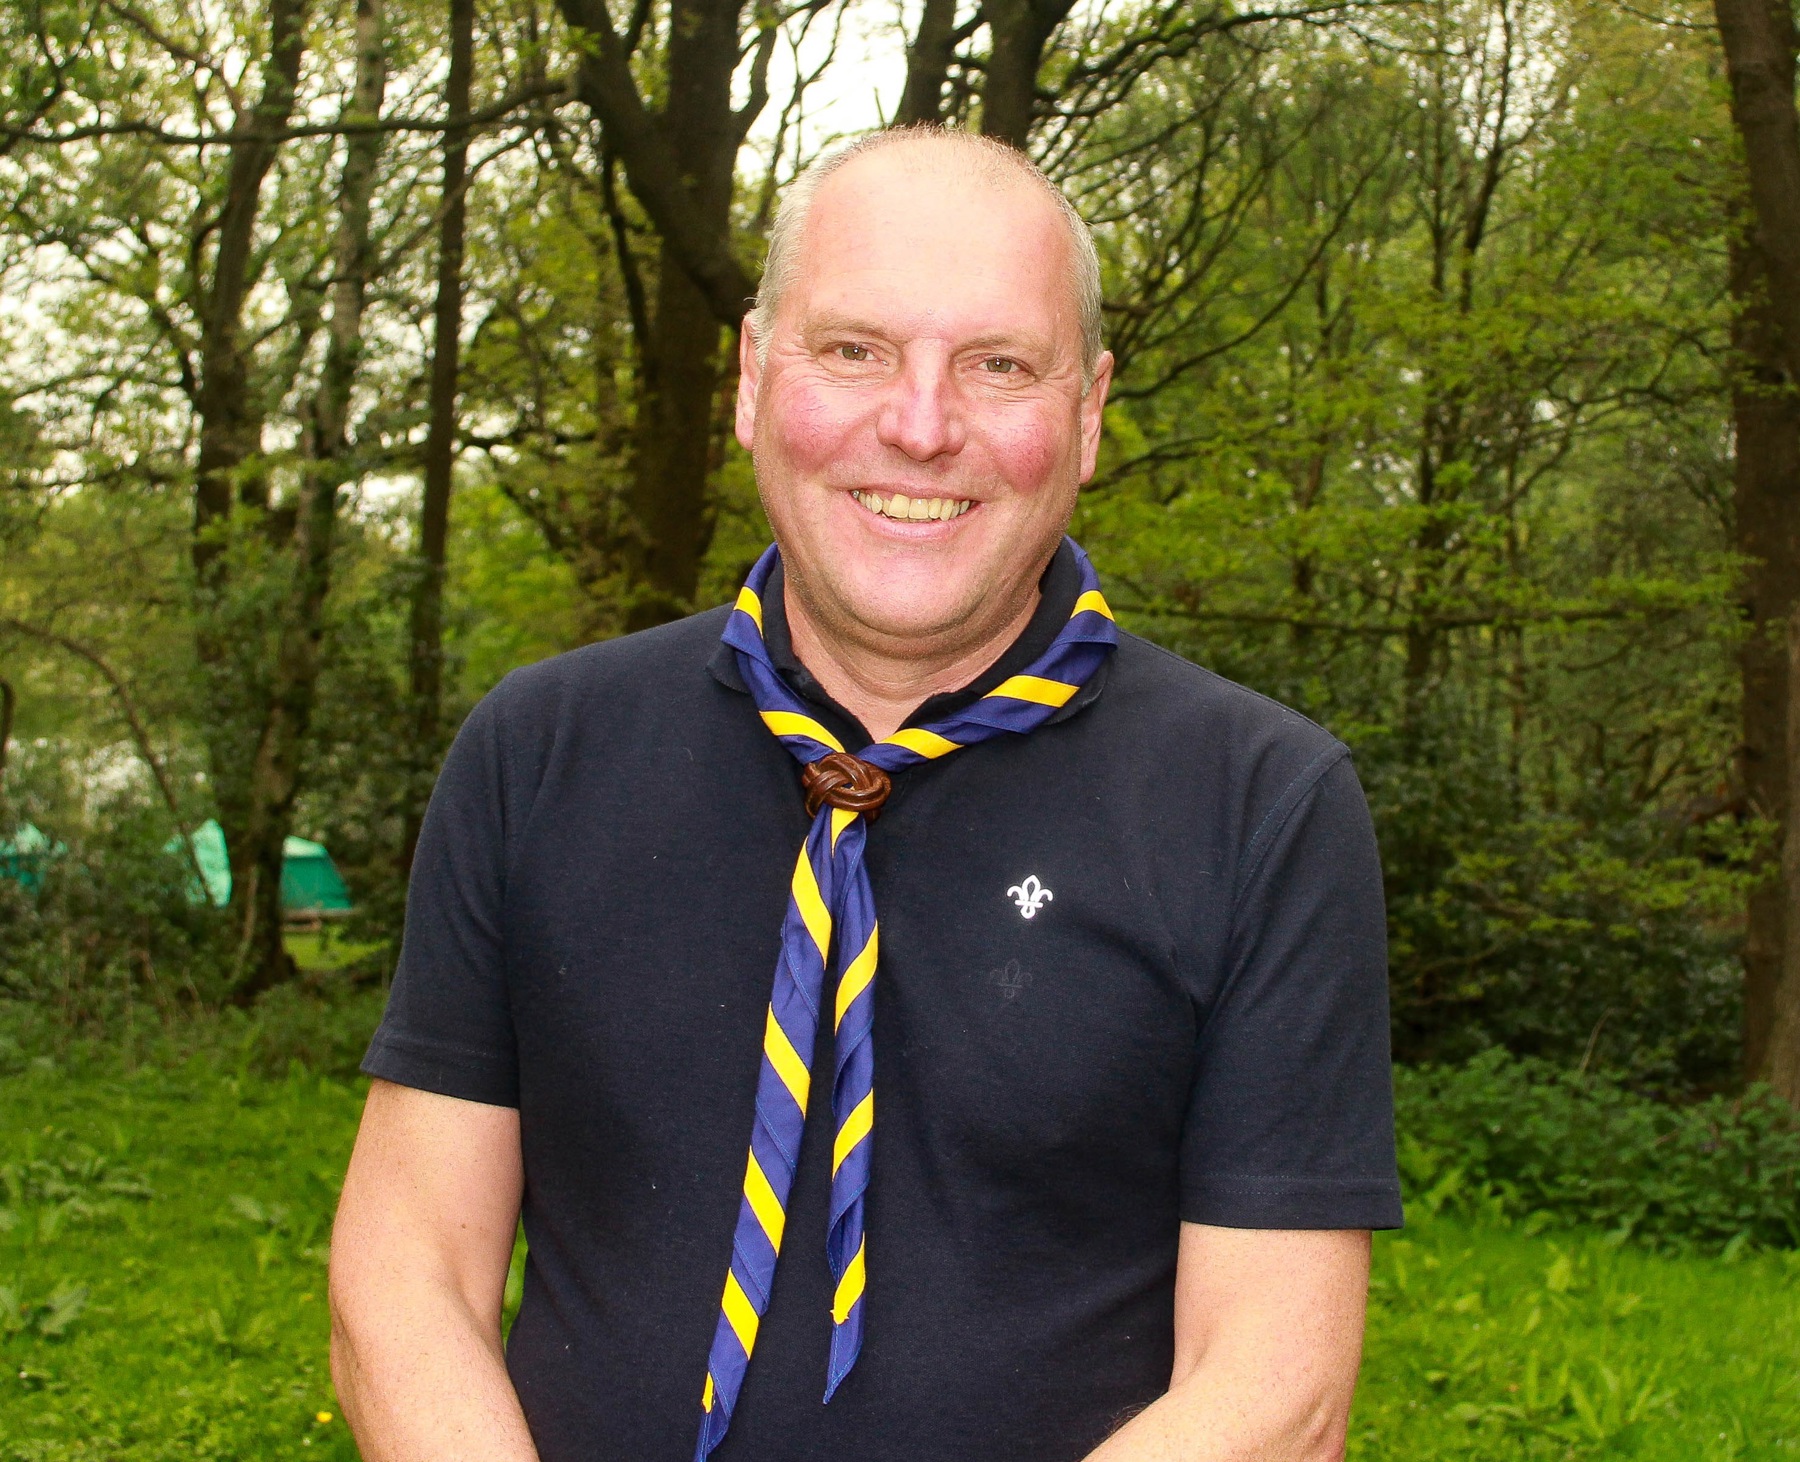 Ian Womersley, County Commissioner for West Yorkshire